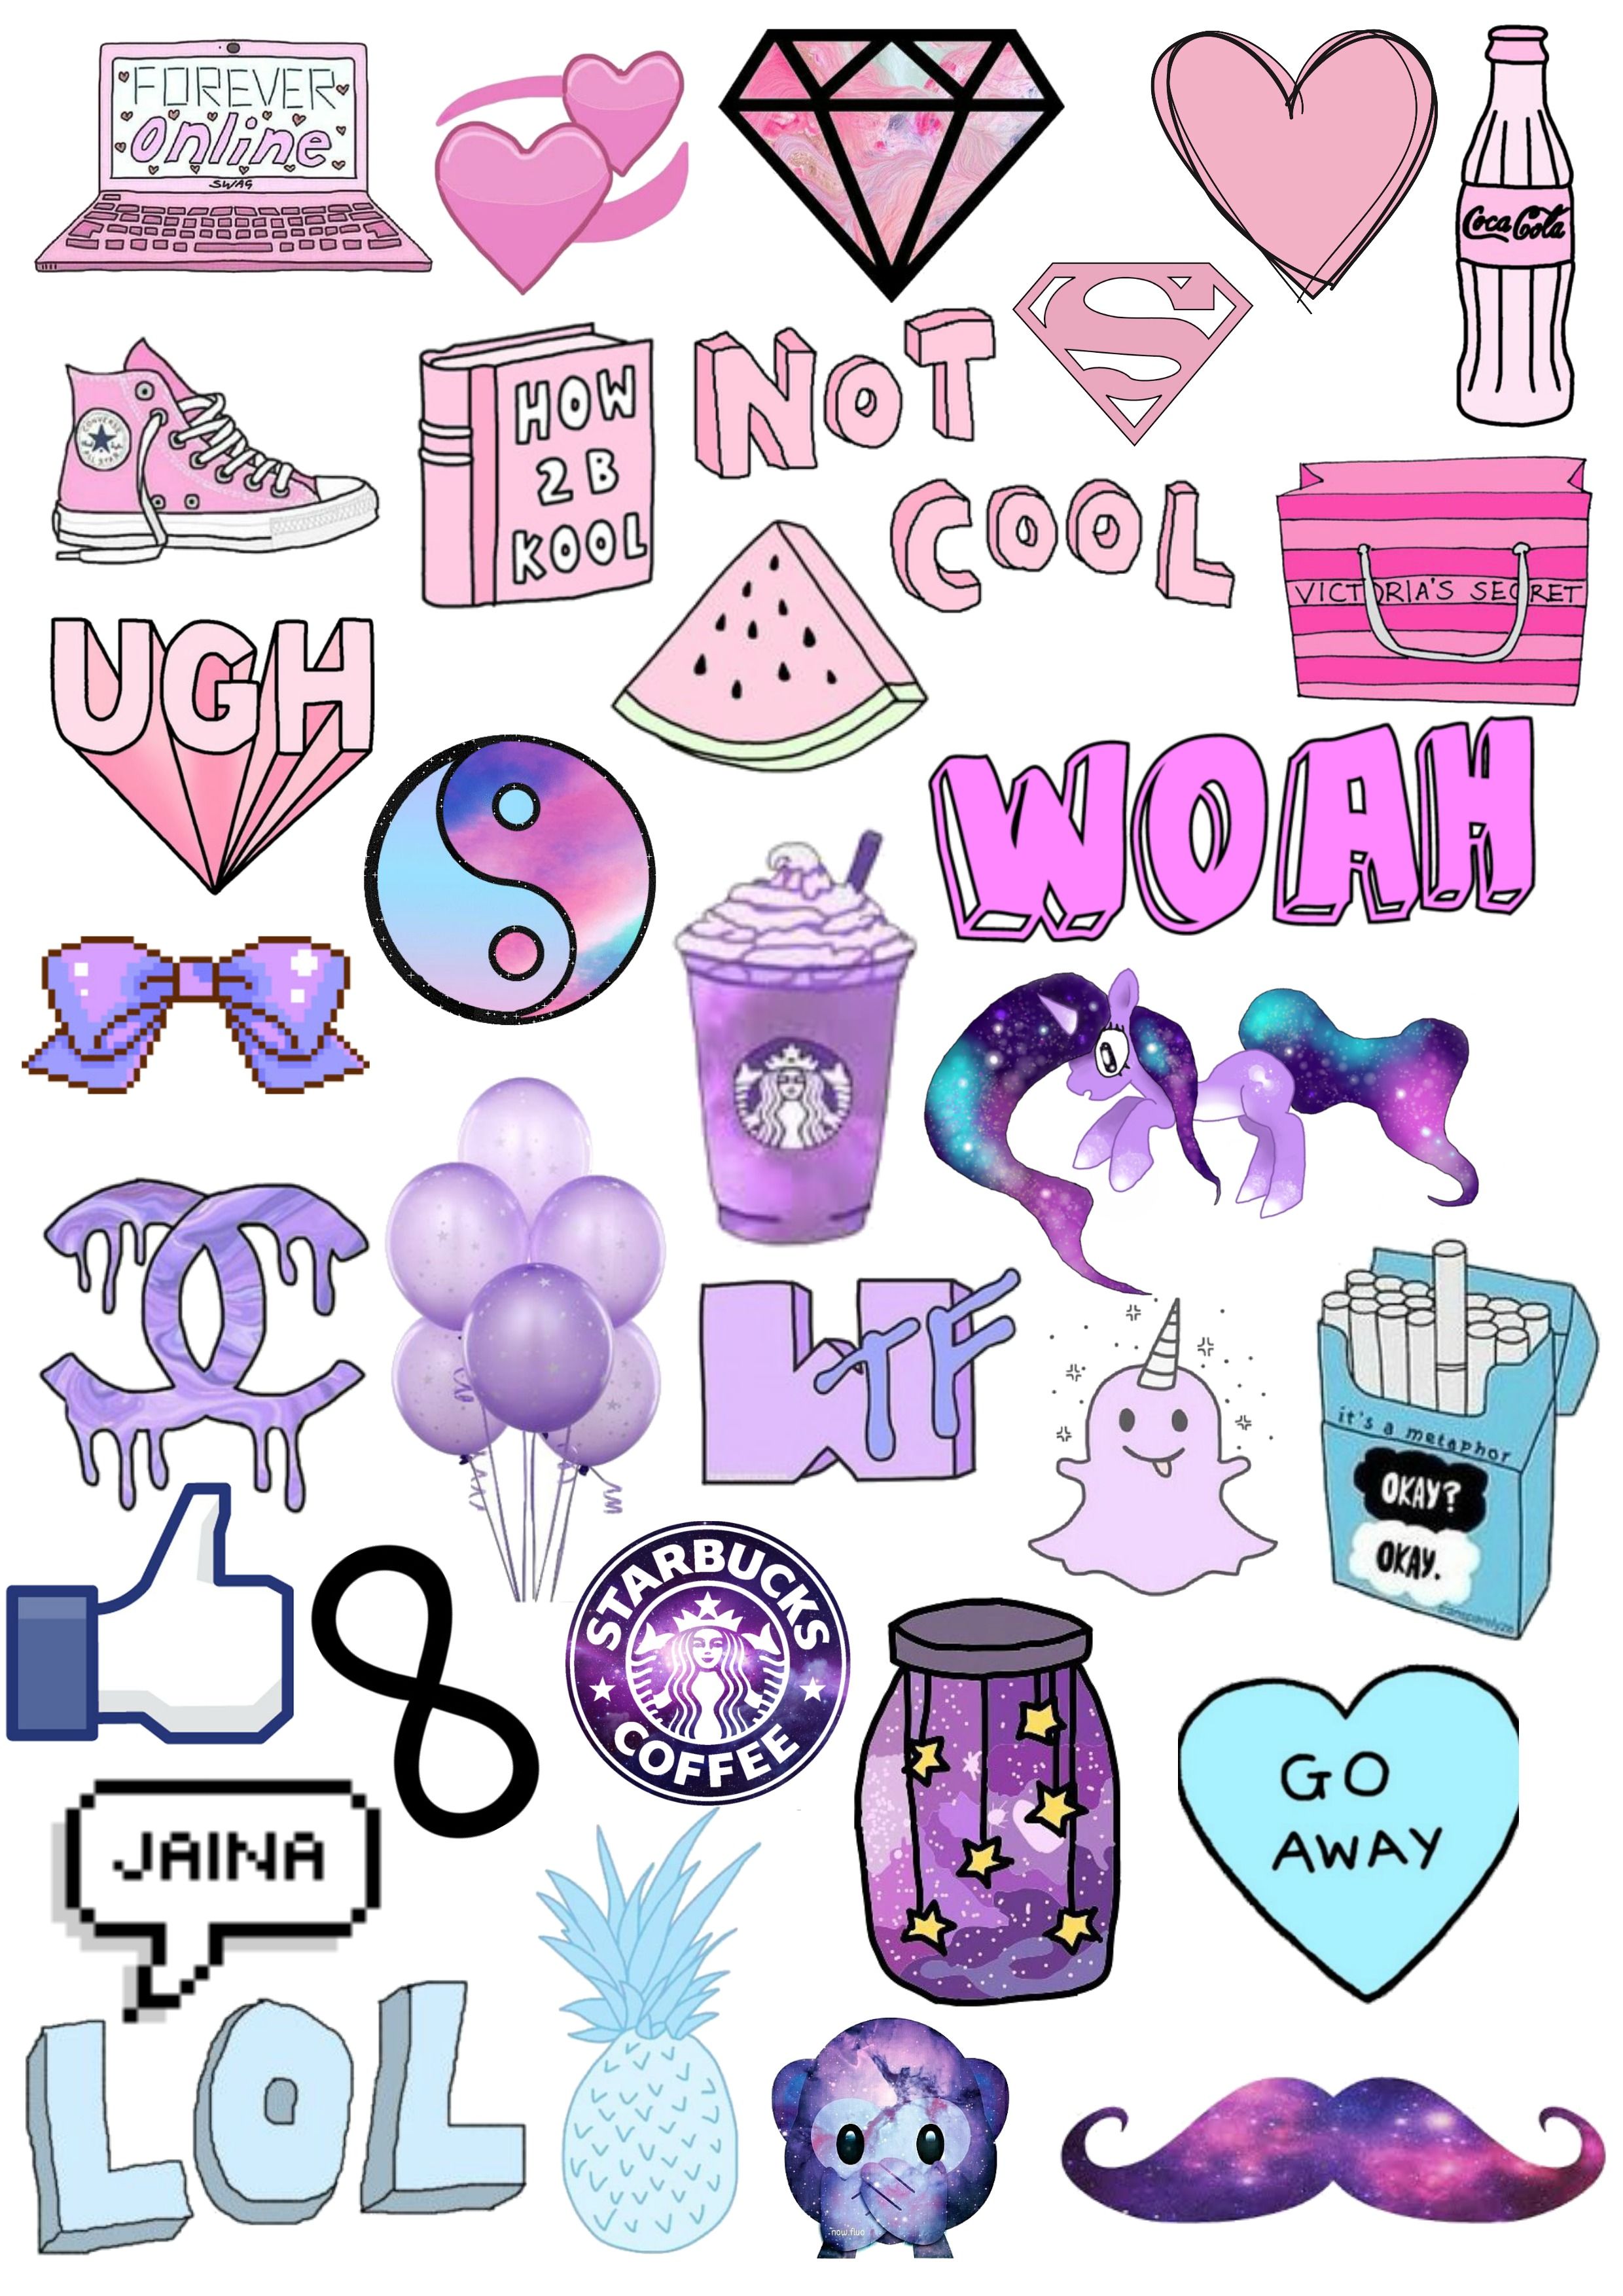 Tumblr collage. Wallpaper stickers, Tumblr stickers, Aesthetic stickers